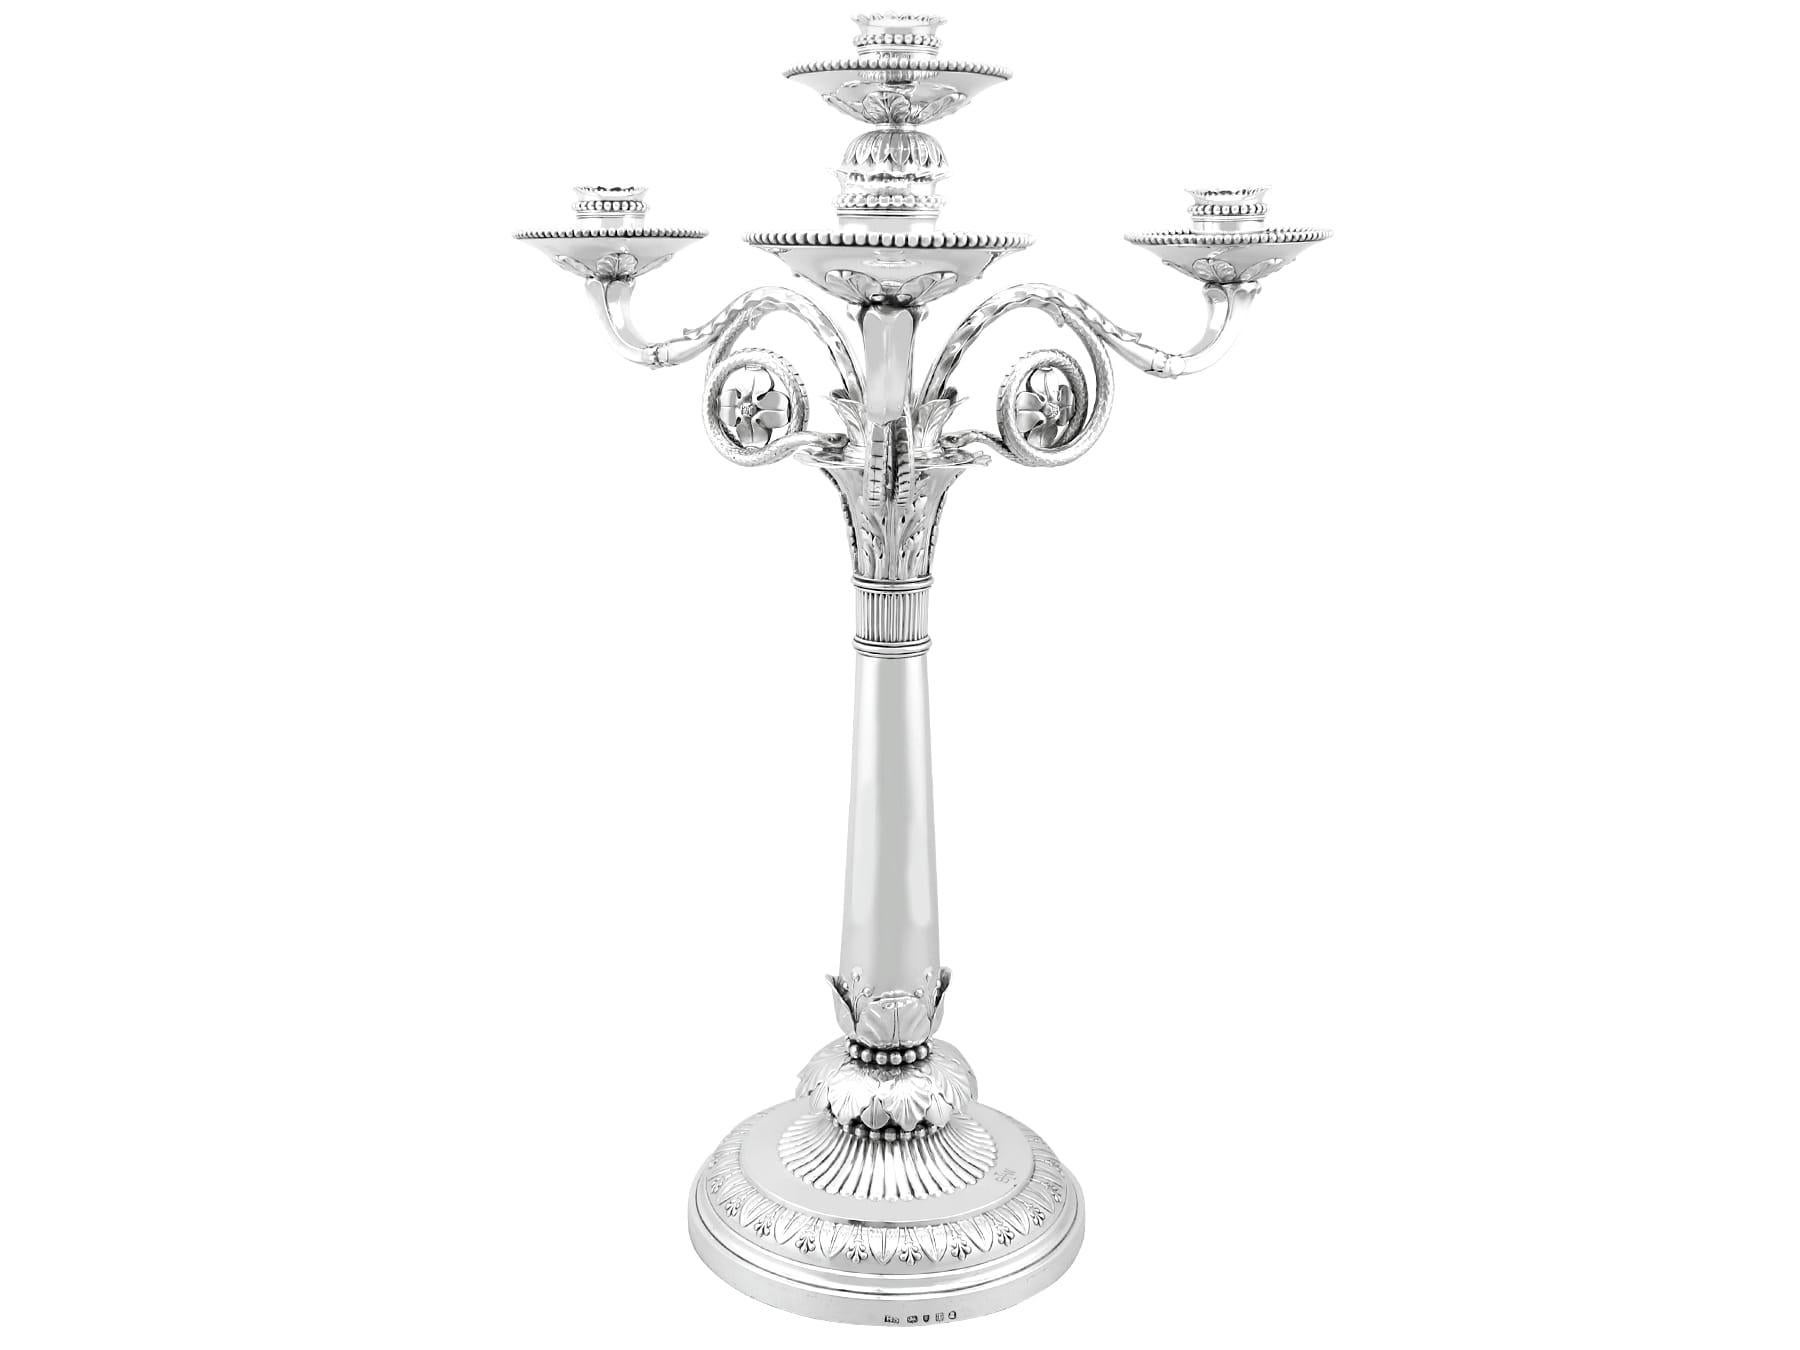 An exceptional, fine and impressive antique George III English sterling silver four light candelabrum centrepiece; an addition to our ornamental silverware collection

This exceptional antique George III English sterling silver candelabrum has a